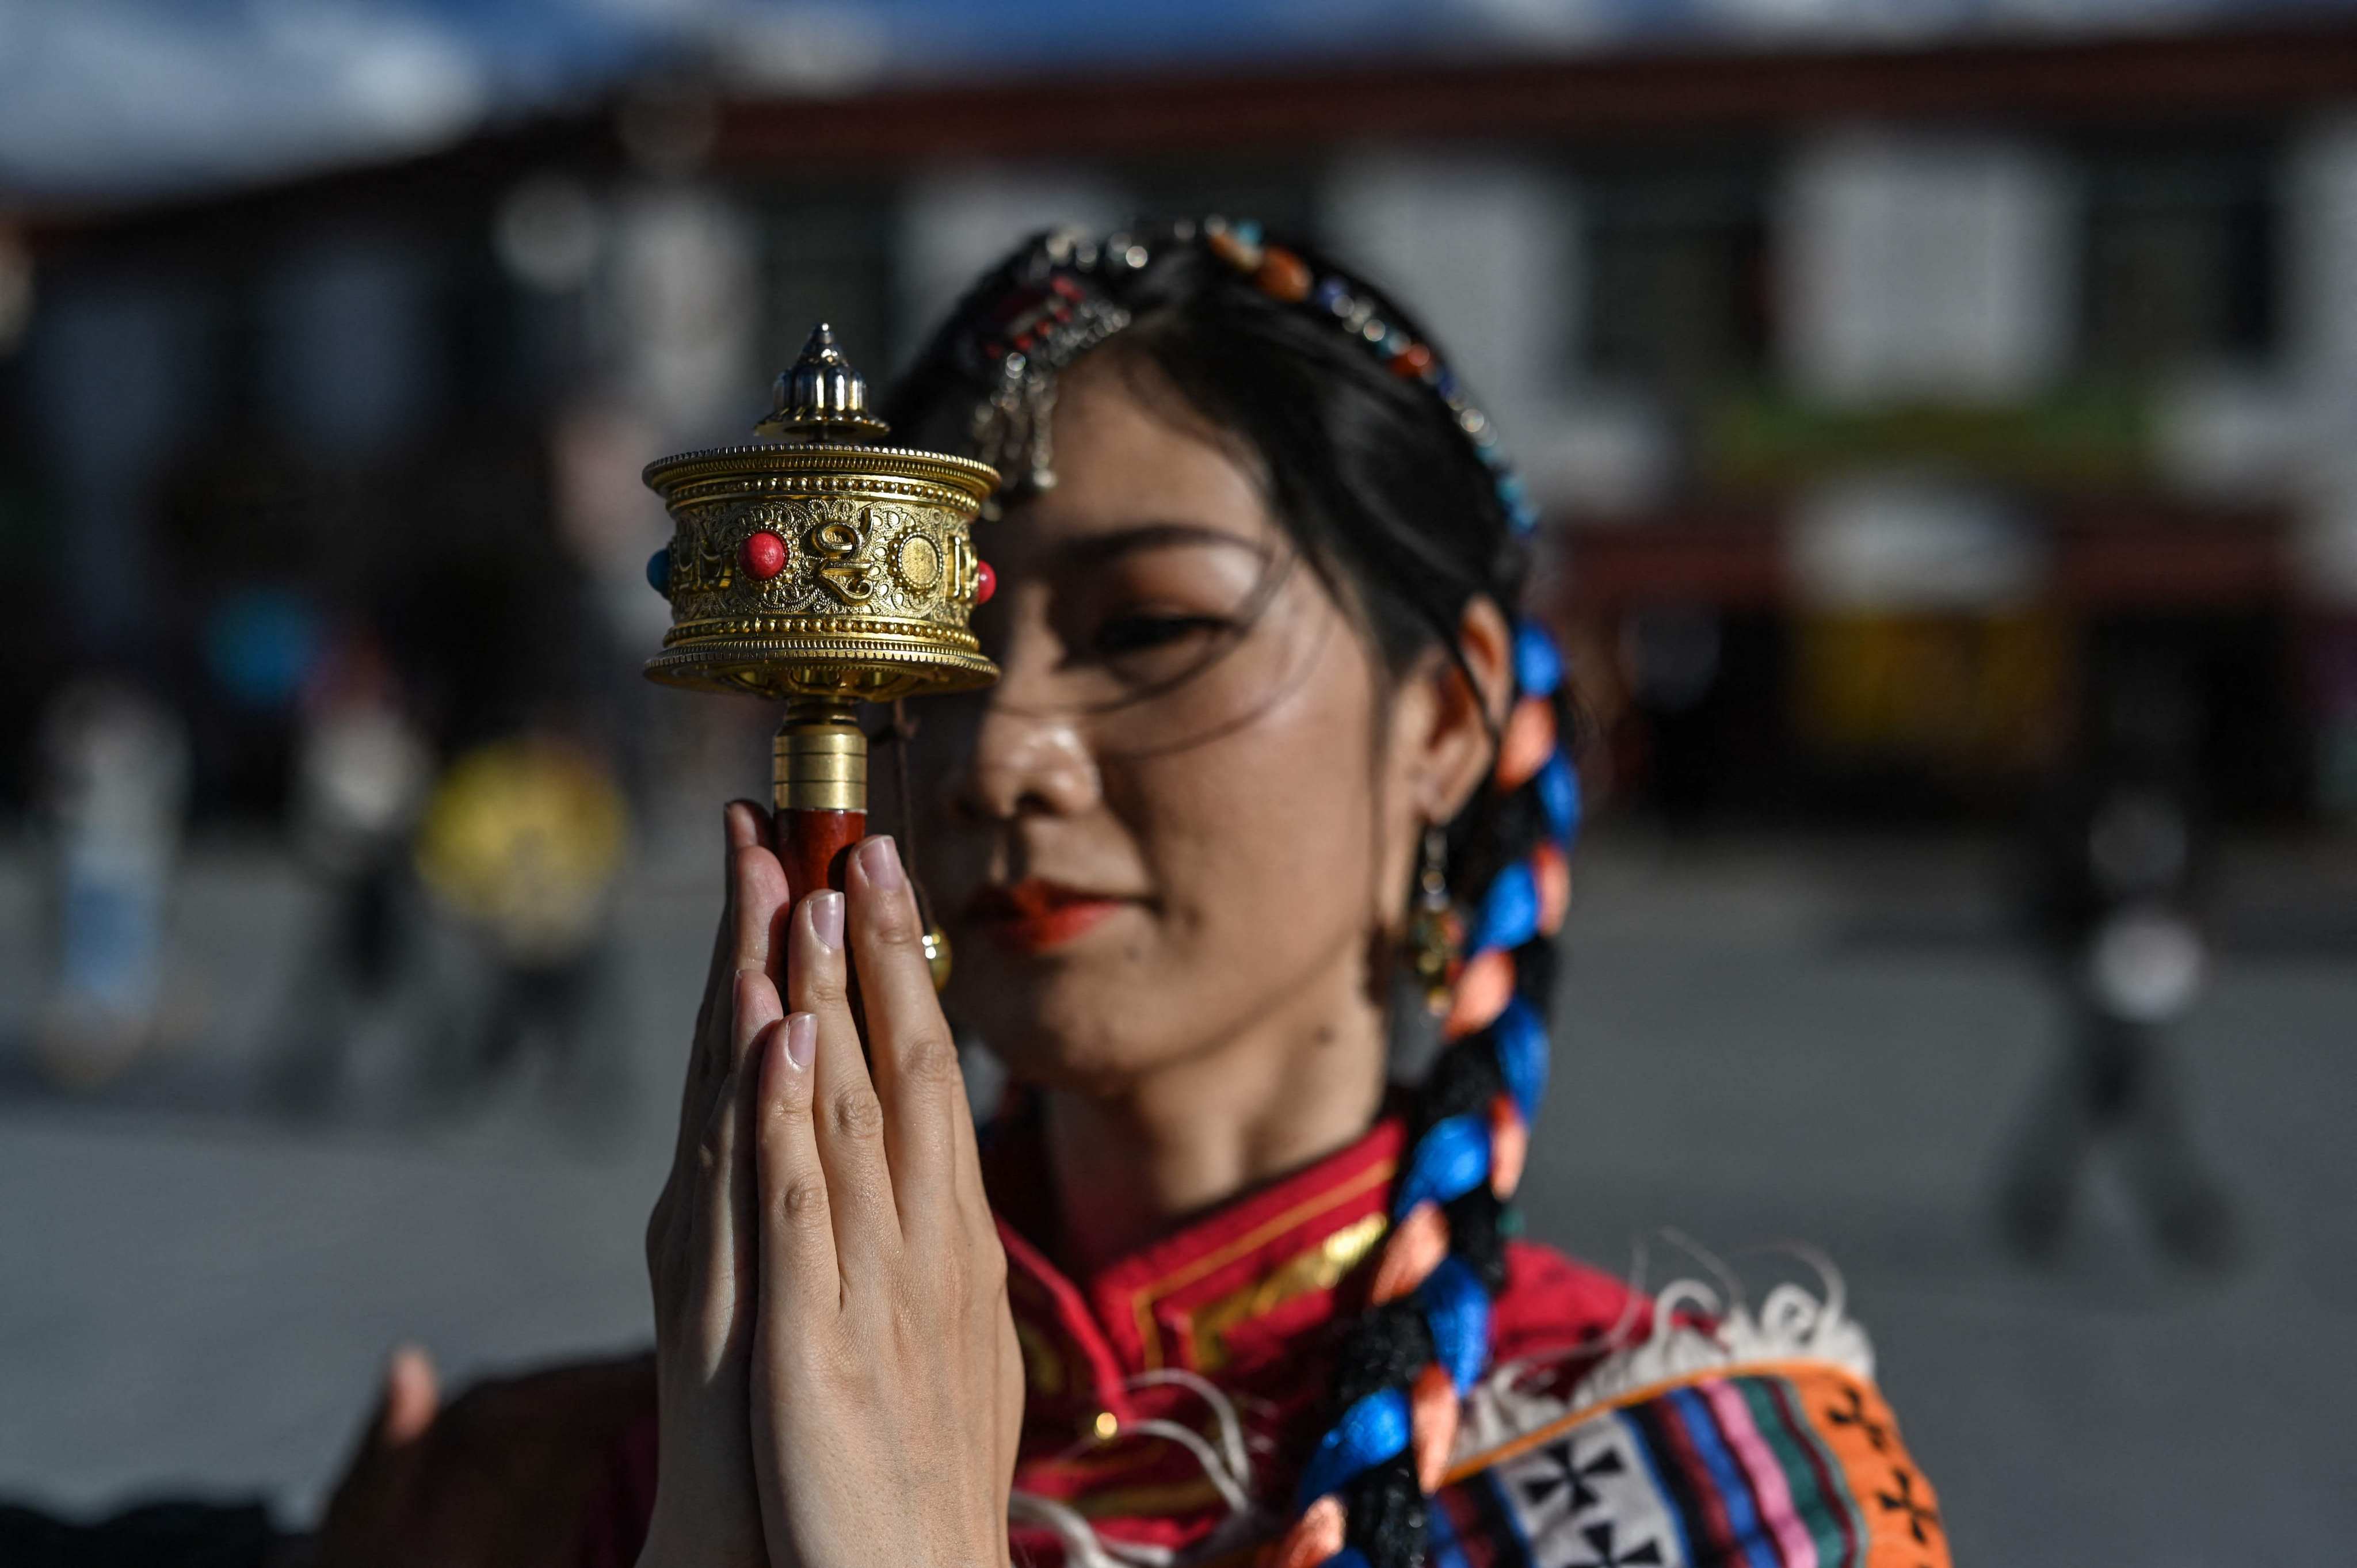 Mass tourism in Tibet has prompted warnings that the influx could overwhelm traditional lifestyles and values. Photo: AFP